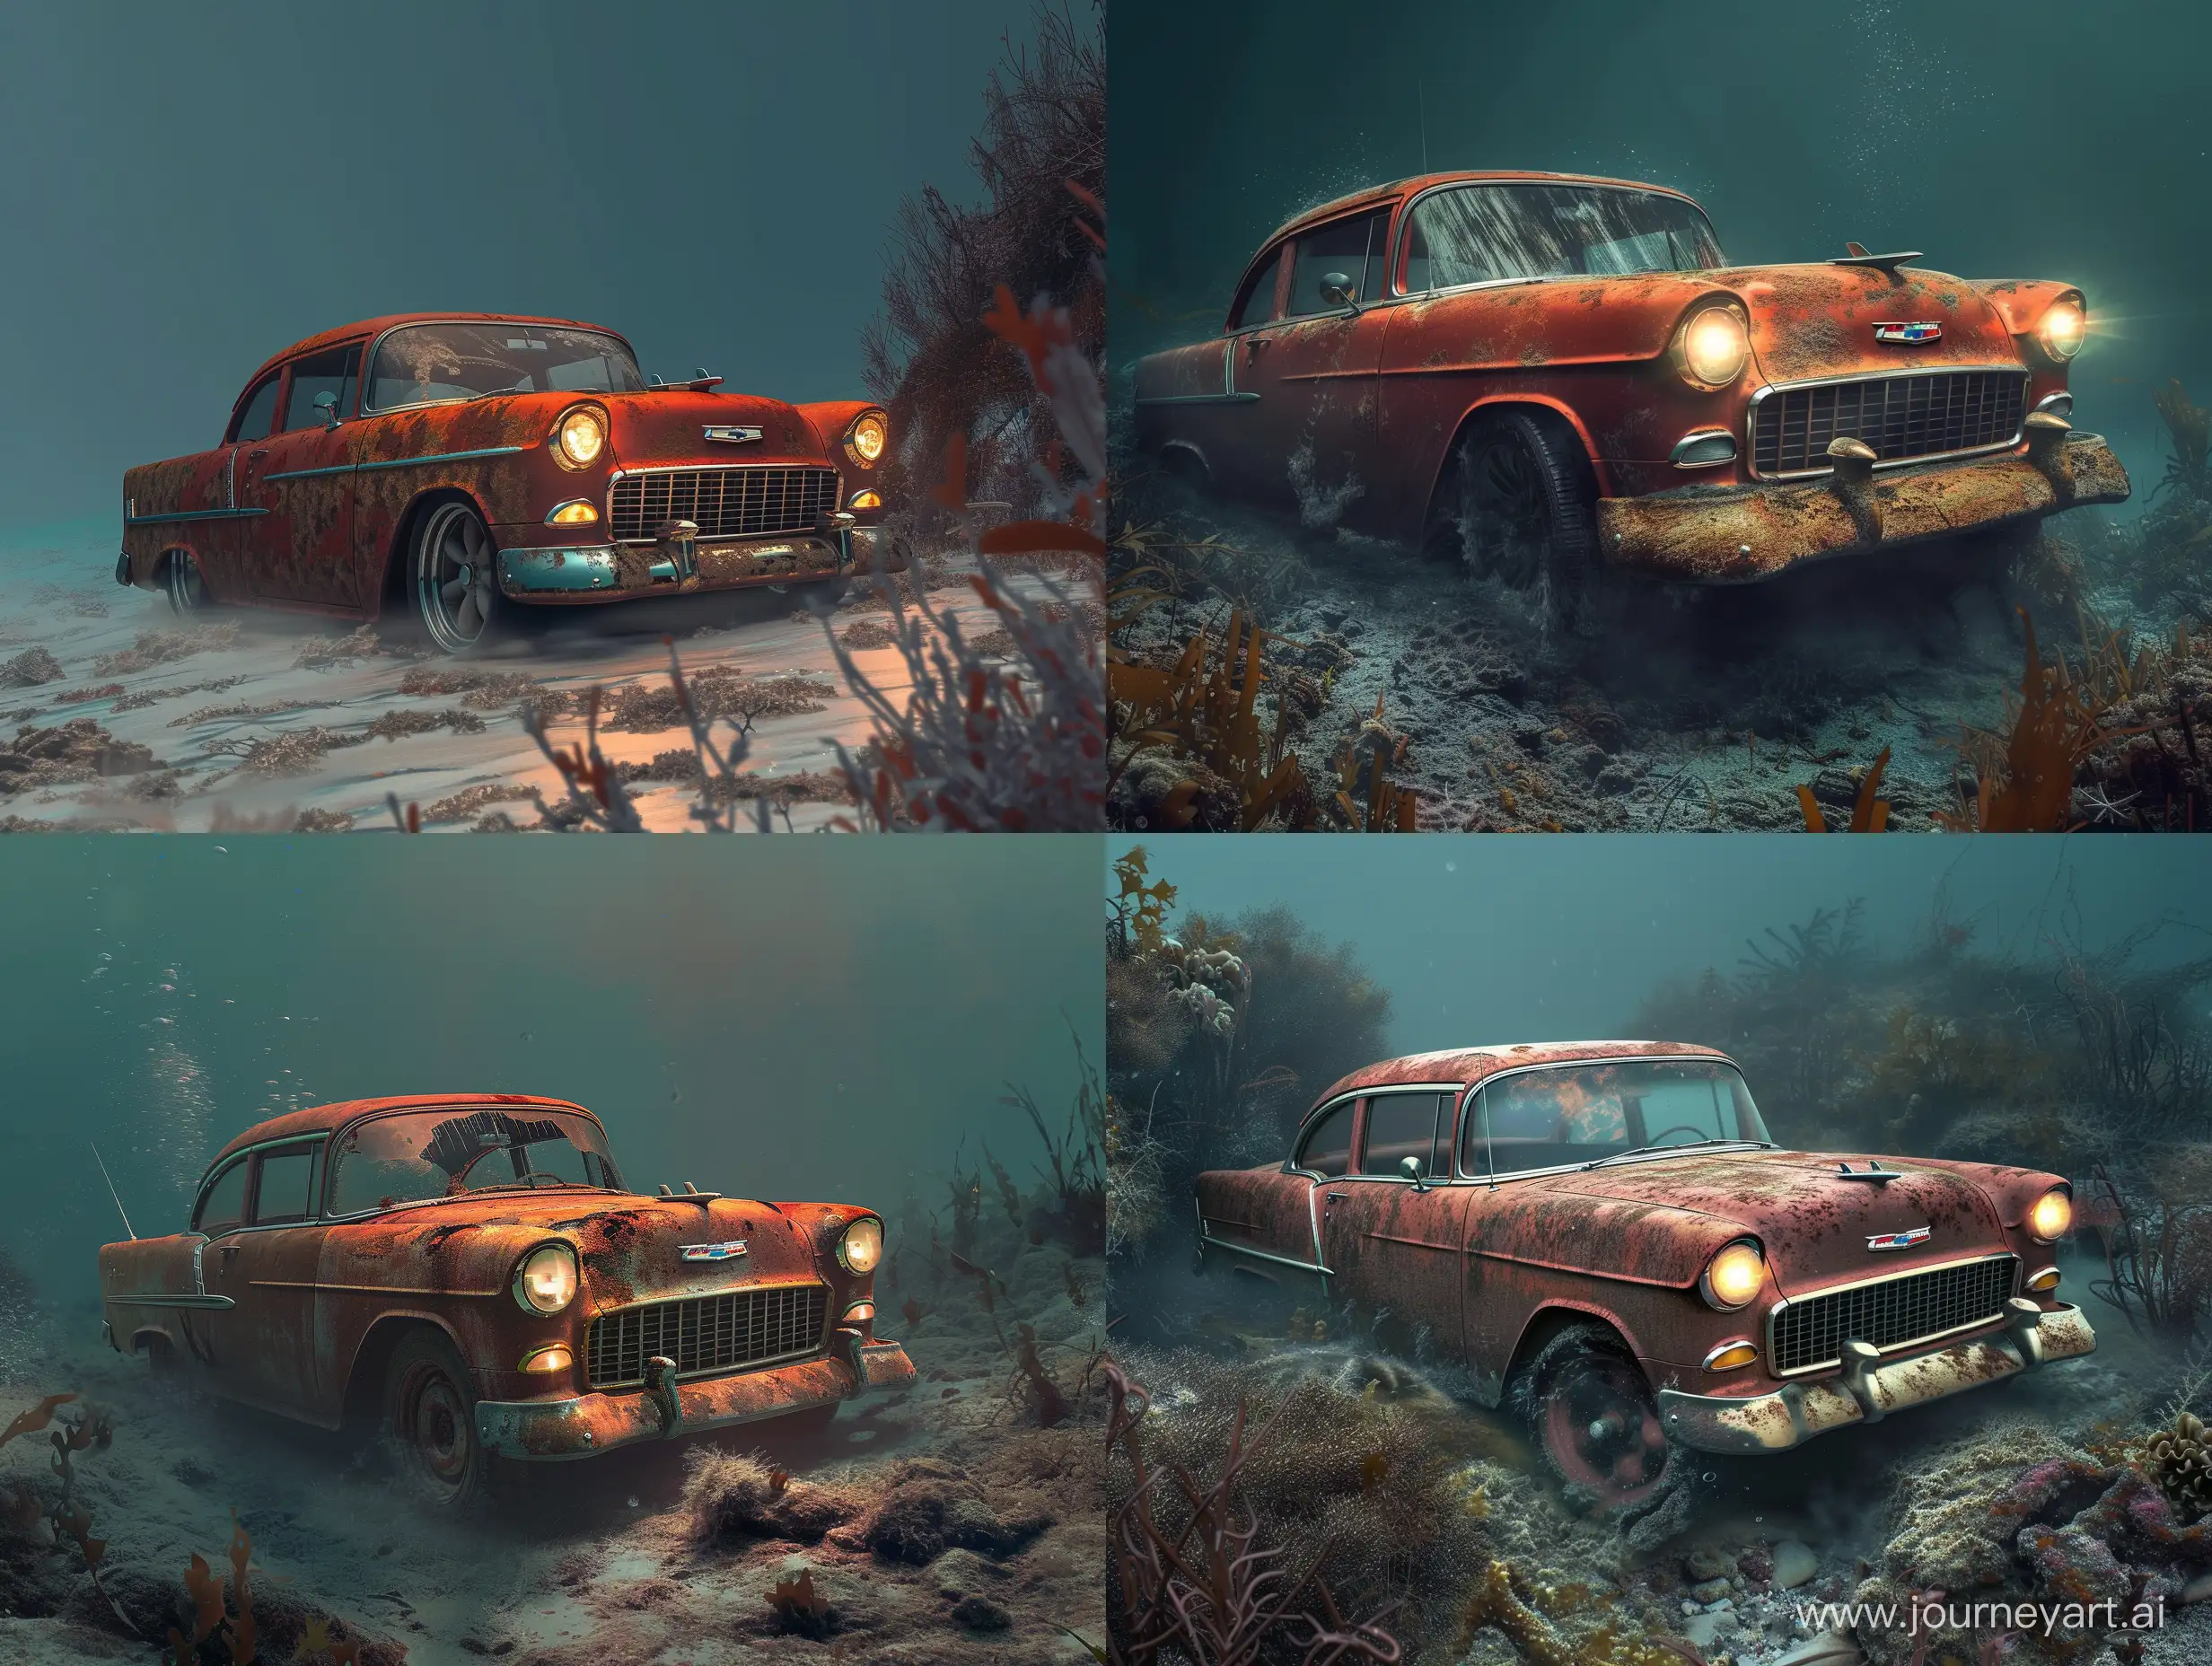 Exploring-the-Seabed-Hyperrealistic-Chevrolet-Bel-Air-55-in-Rusty-Red